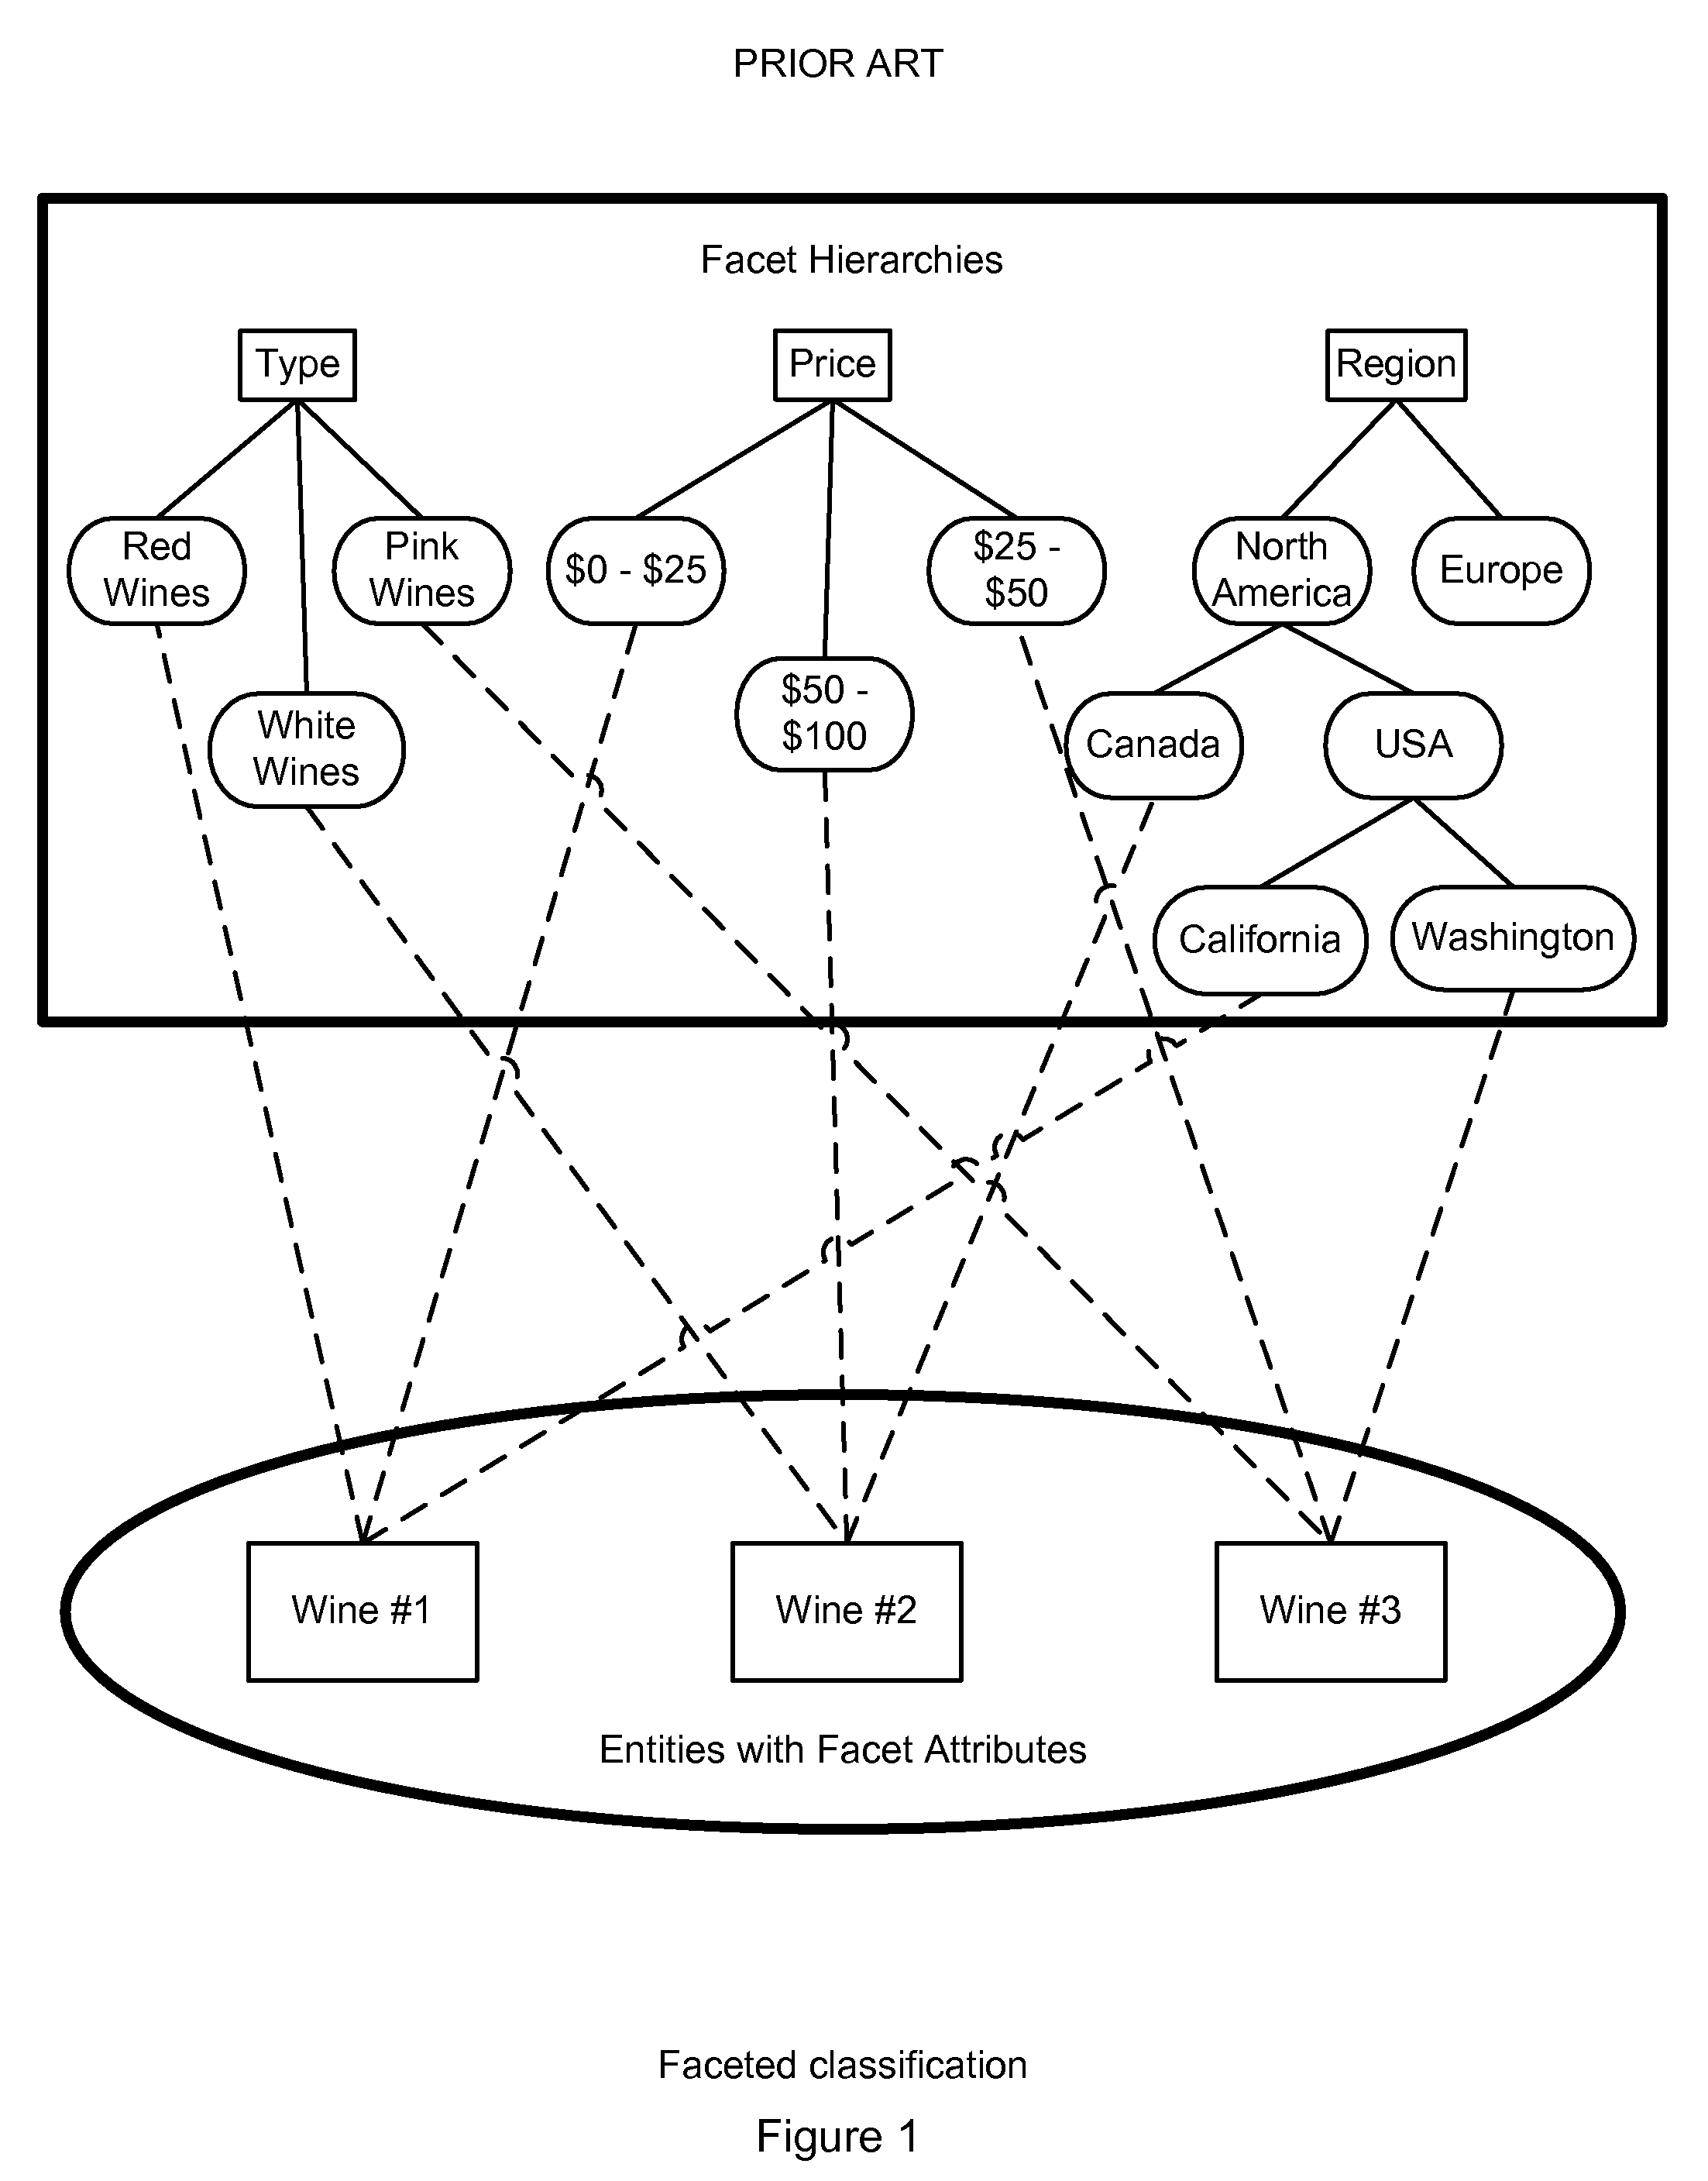 System, Method and Computer Program for Faceted Classification Synthesis